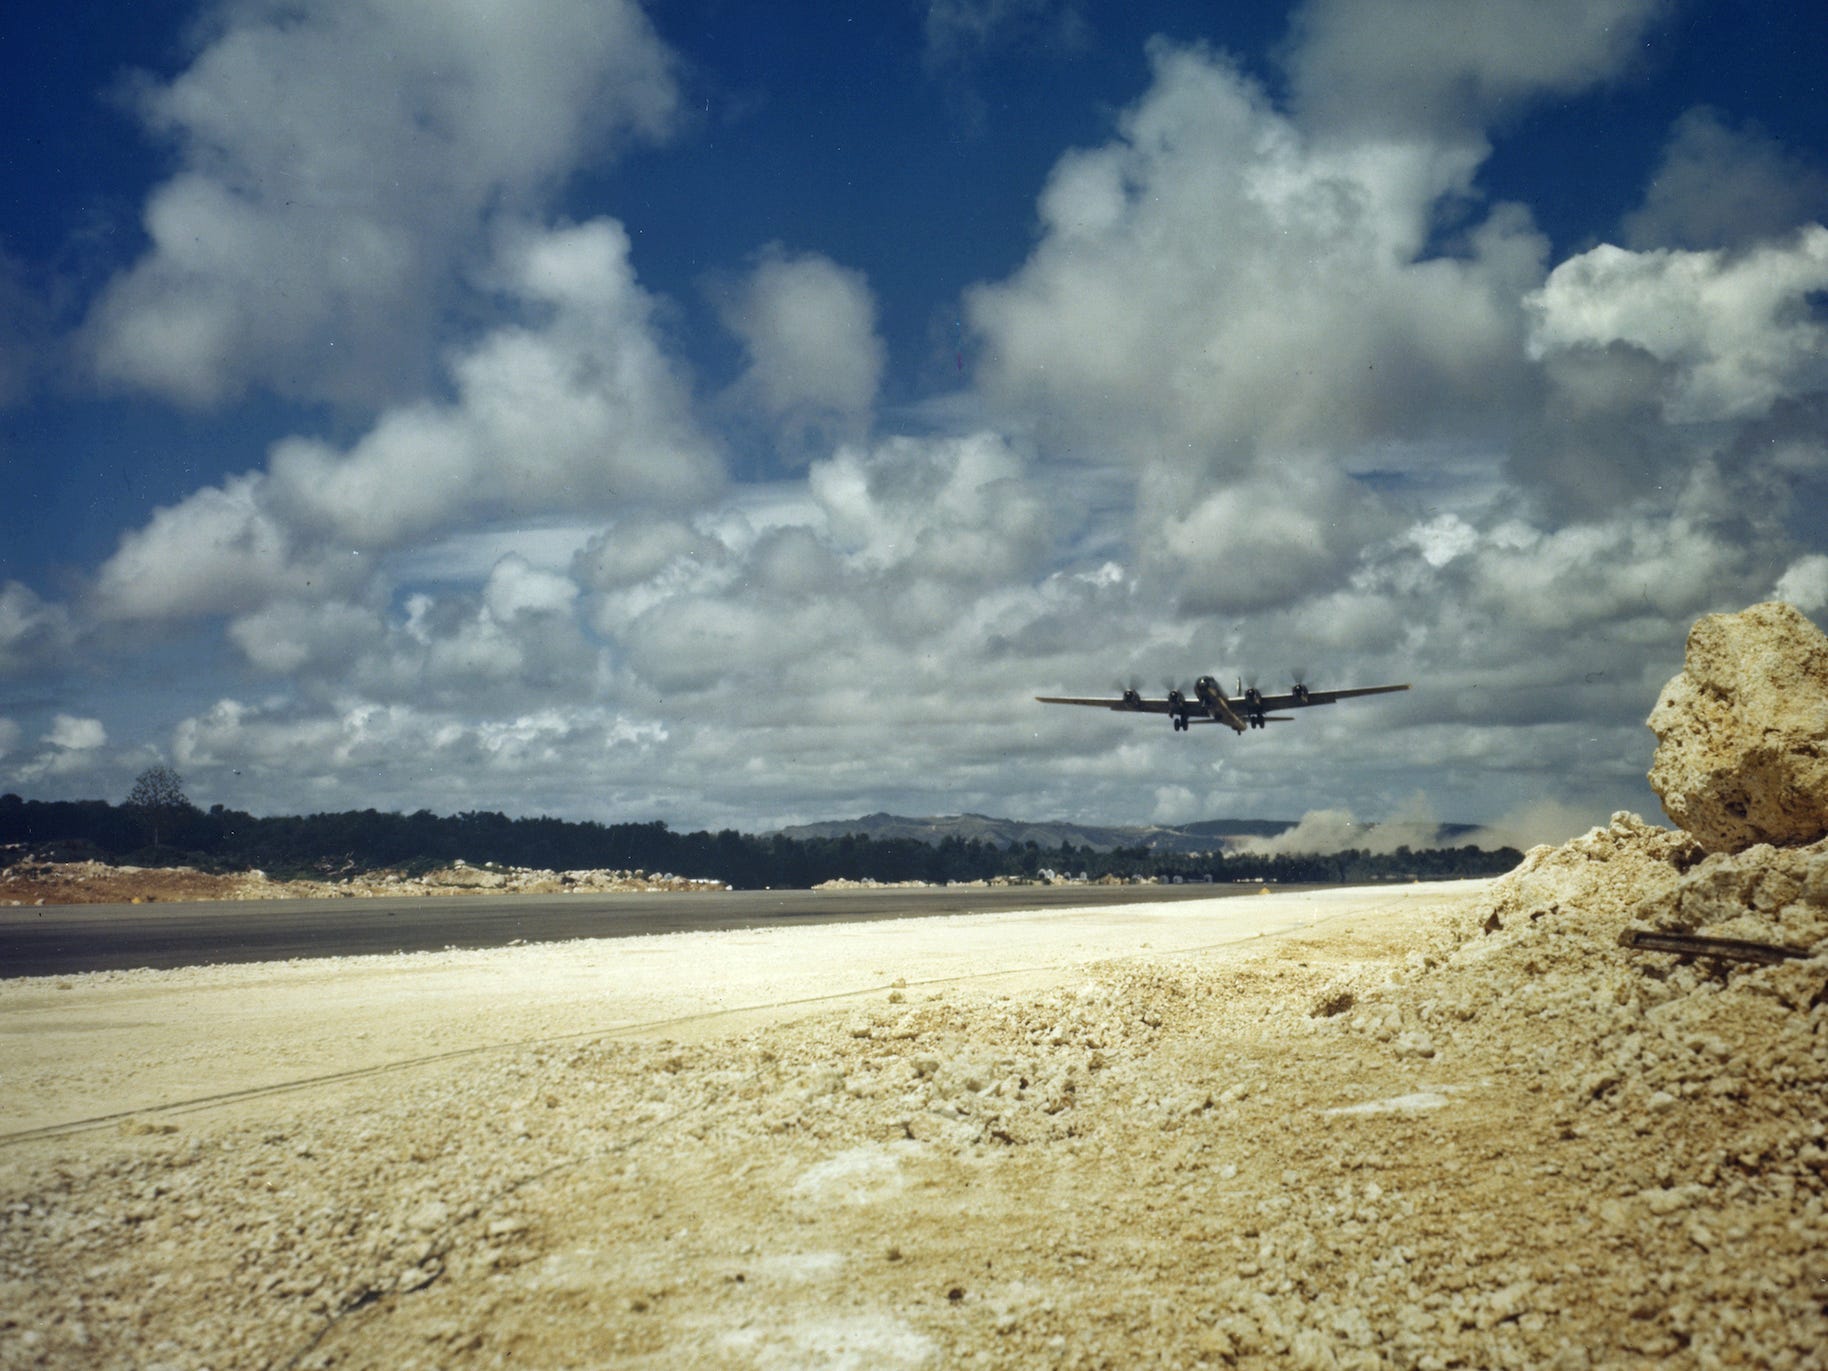 B-29 over runway at Harmon Field Guam during WWII